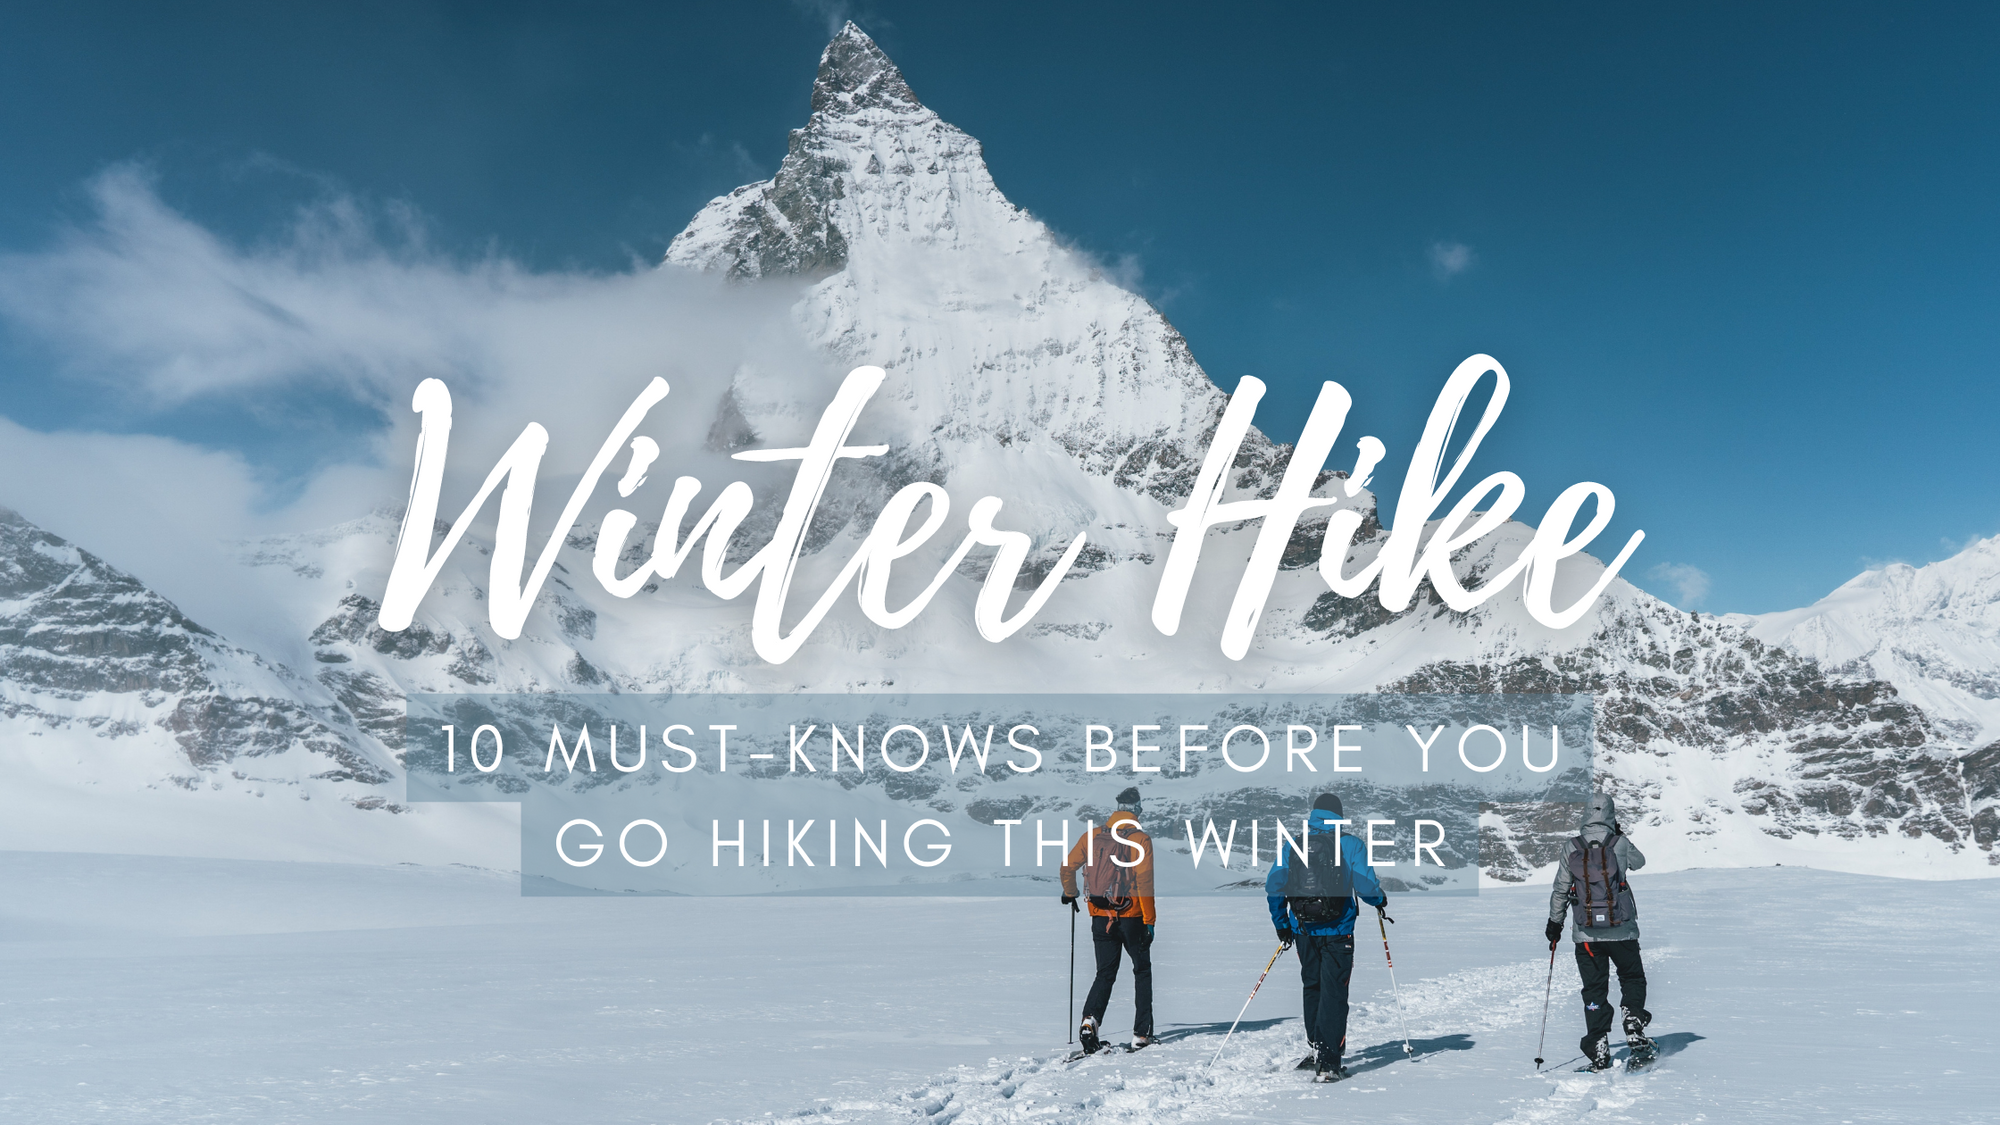 Winter hiking: Must-knows before you go hiking this winter